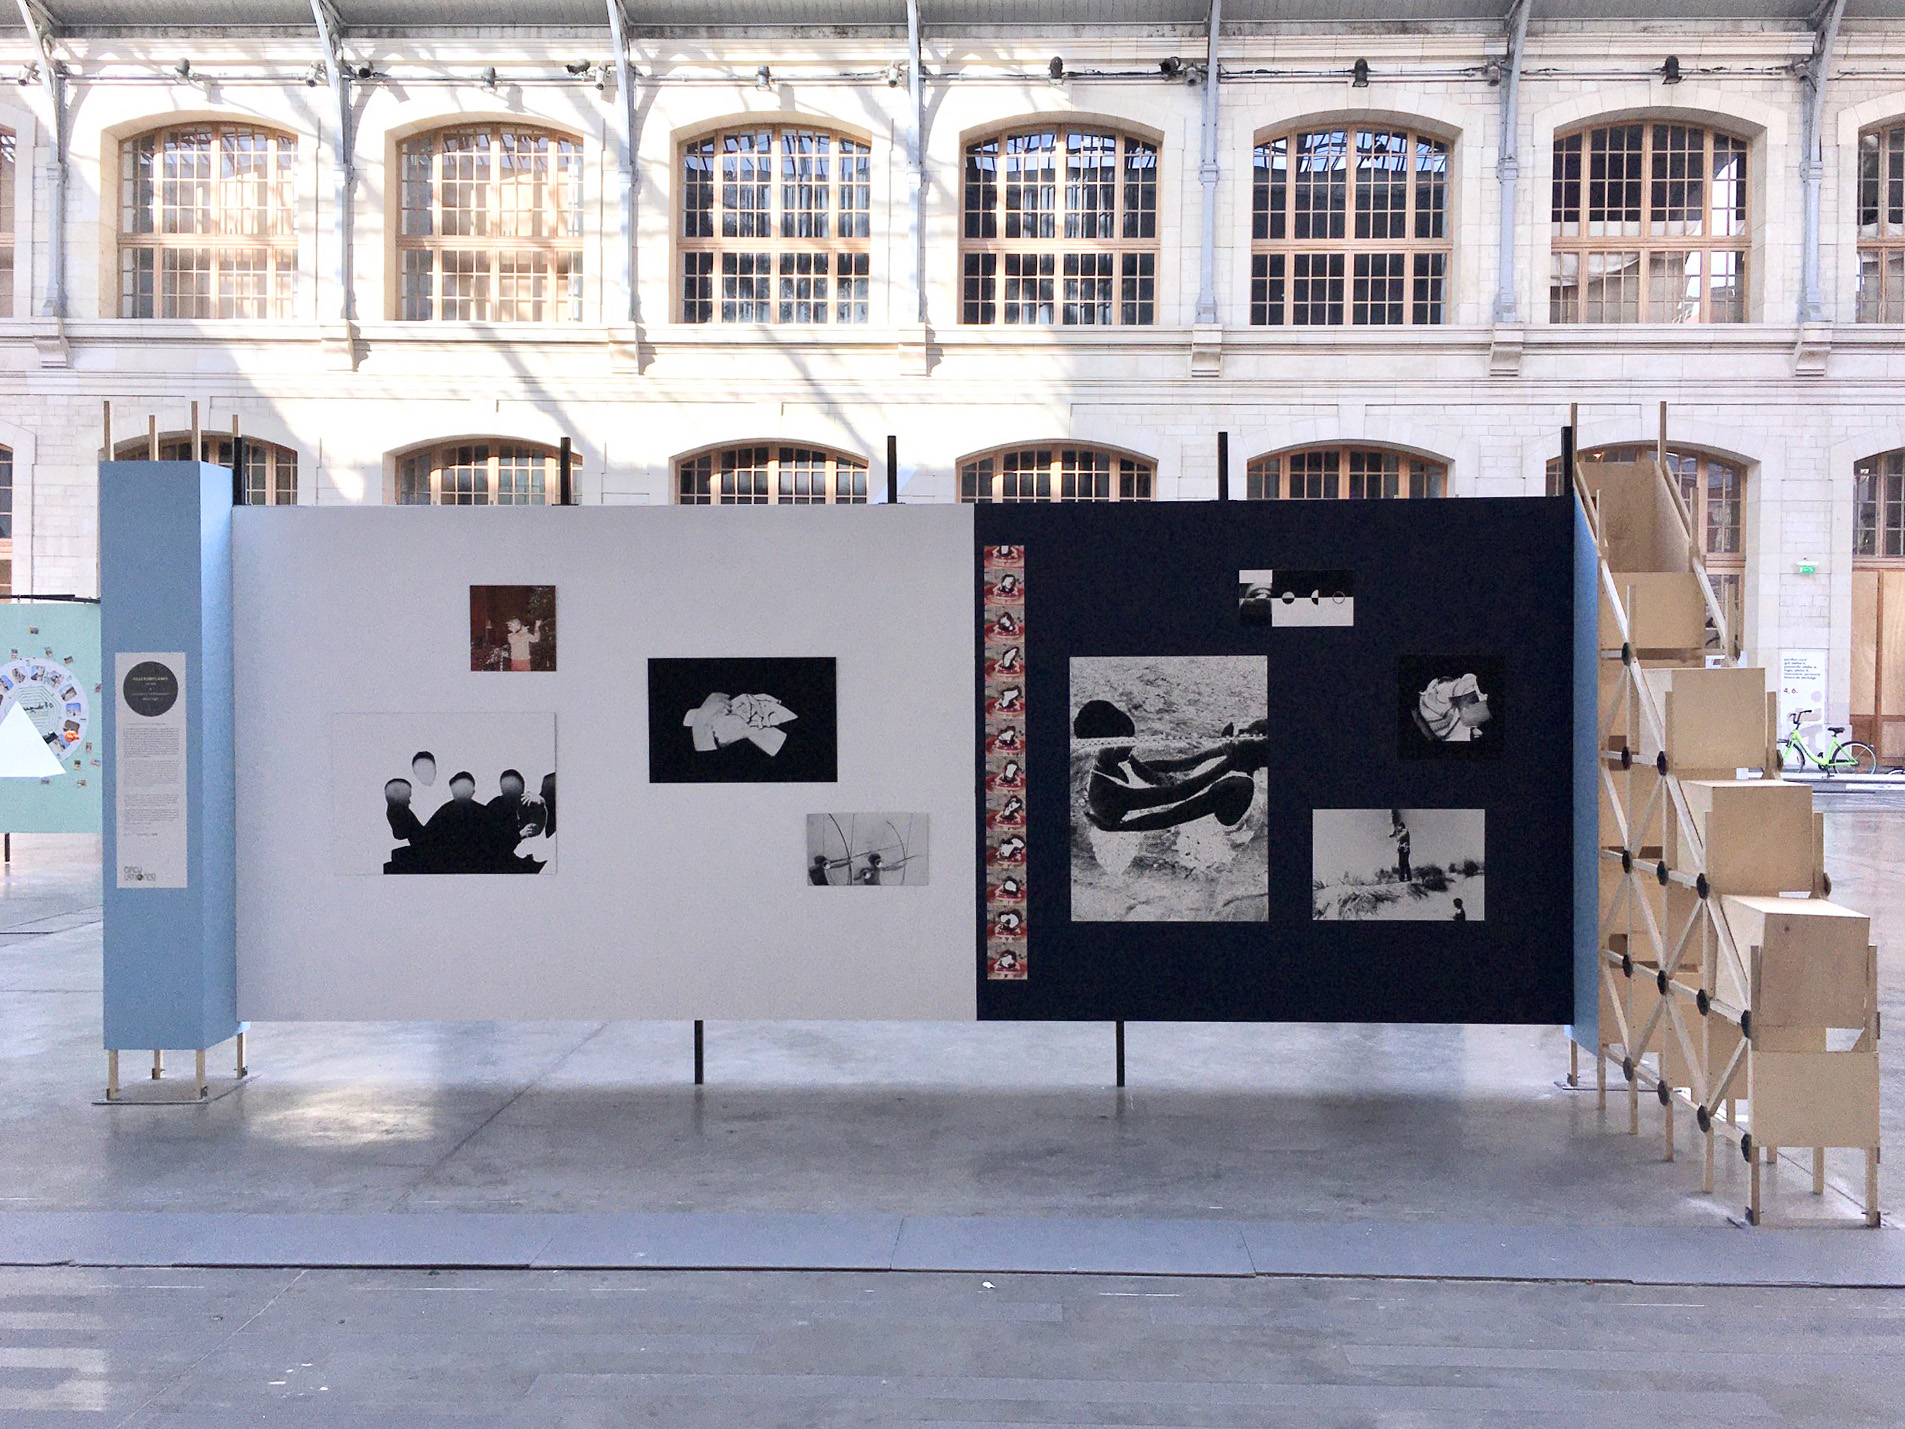 Installation View at Circulations, European Festival of Young Photography, Paris, France 2020